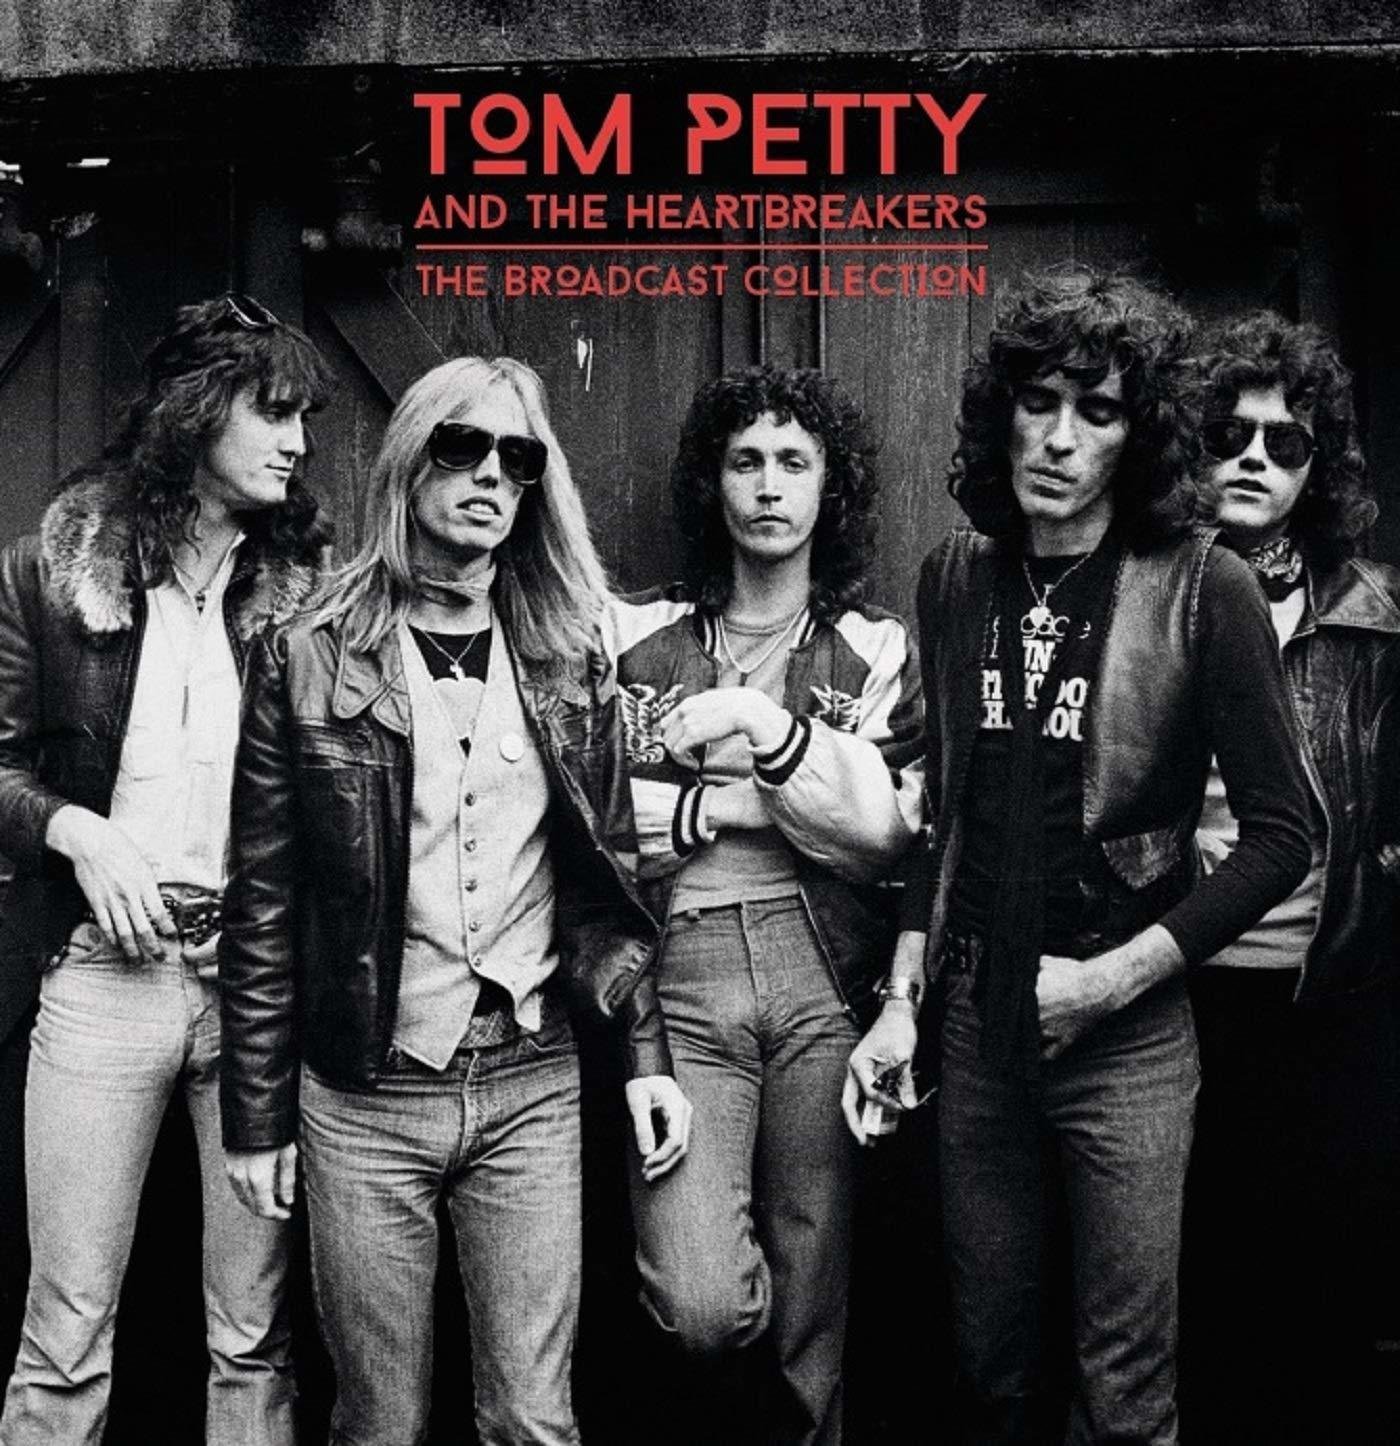 Vinyylilevy Tom Petty - The Broadcast Collection (3 LP)